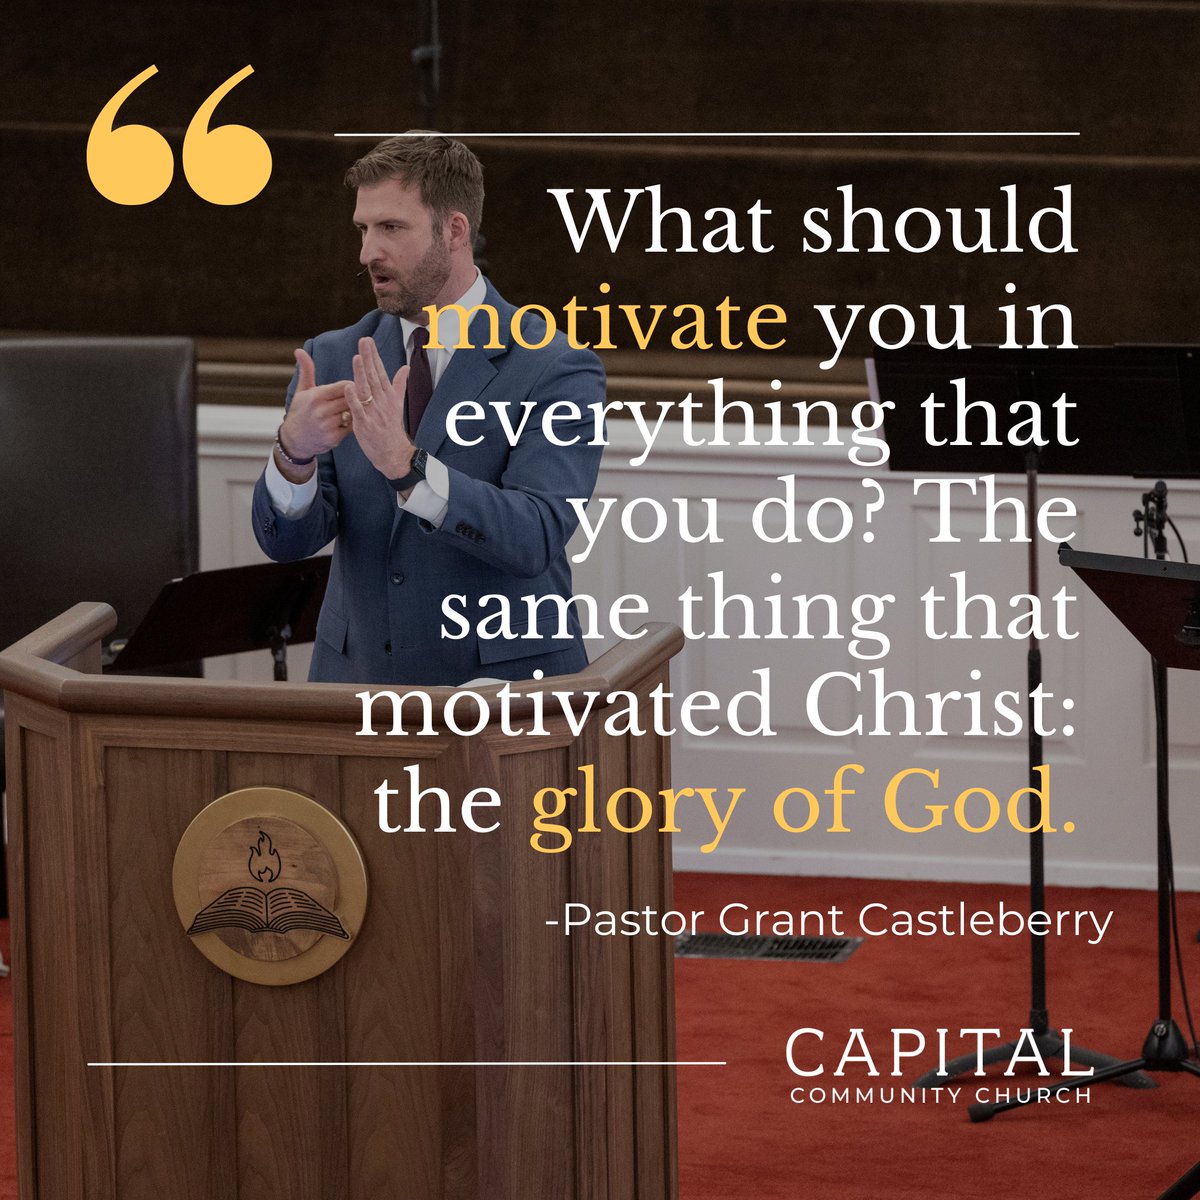 It was a great Sunday as we heard from Pastor @grcastleberry on John 17 in his message 'A Heart for Glory'. 

We pray you were encouraged. If you missed it, you can catch the replay at tinyurl.com/x2bmb8c. 

#SundaySermon #CapitalCommunityChurch #GlorytoGod